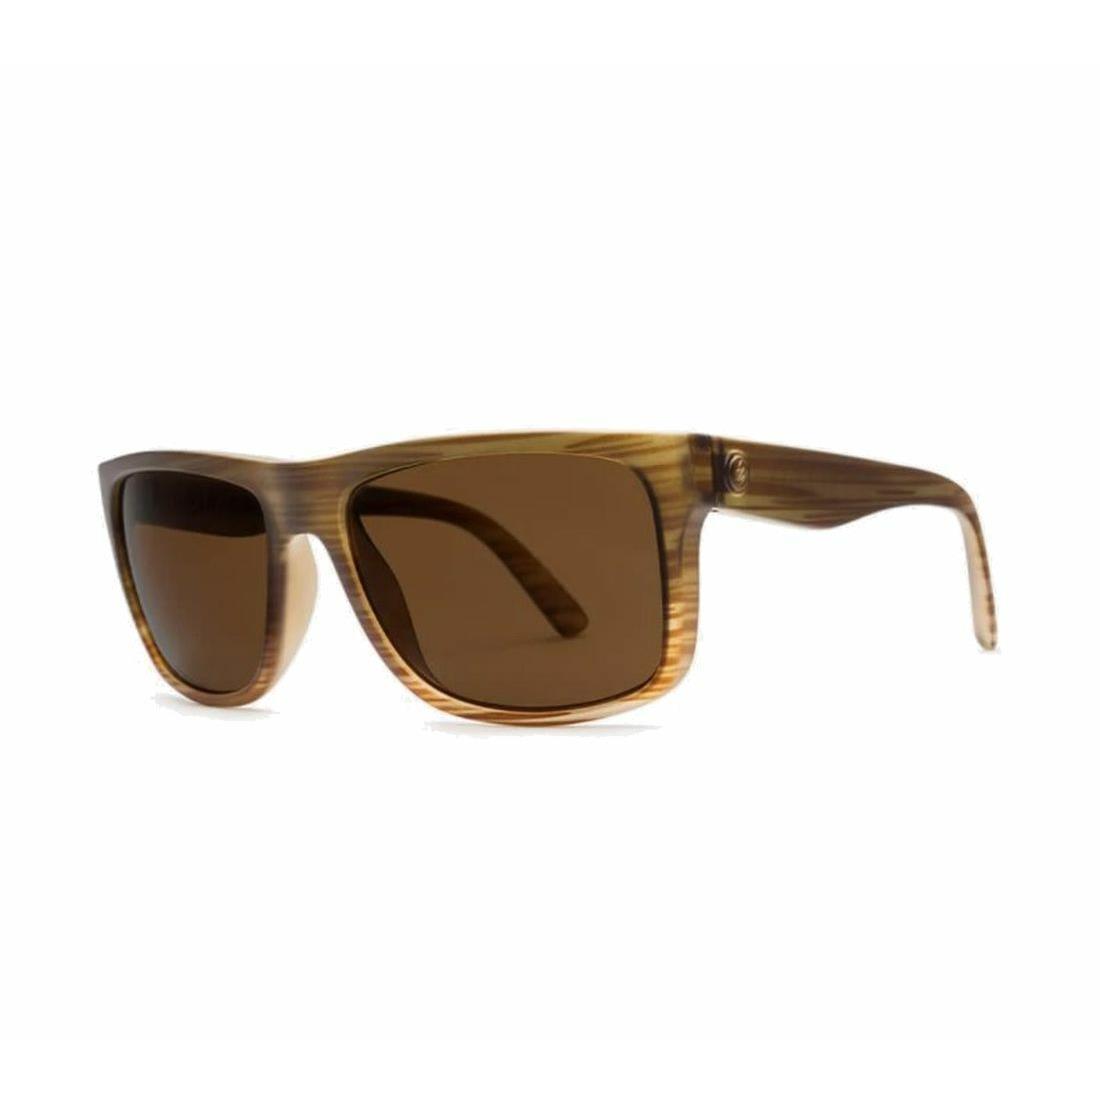 Electric Swingarm Sunglasses Red Wood with Bronze Polarized Lens